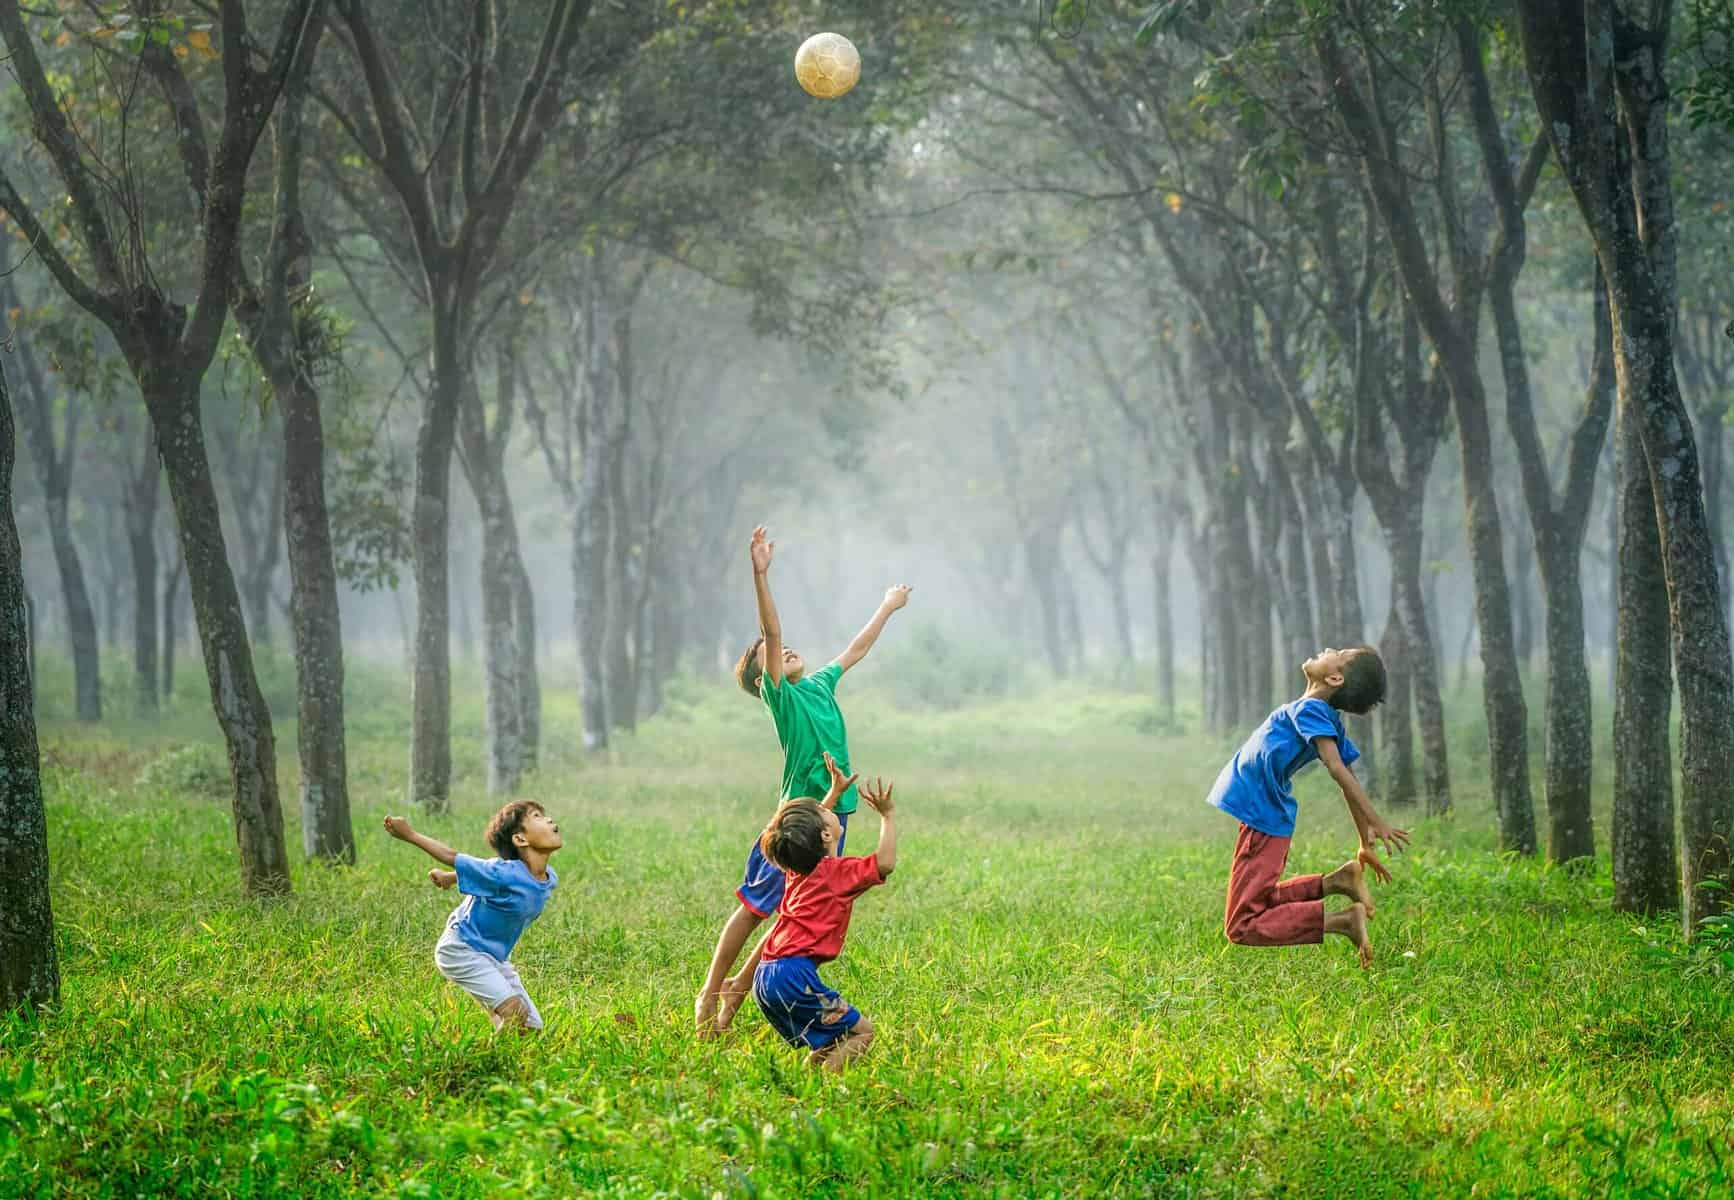 4 boys playing with a ball in field surrounded by trees